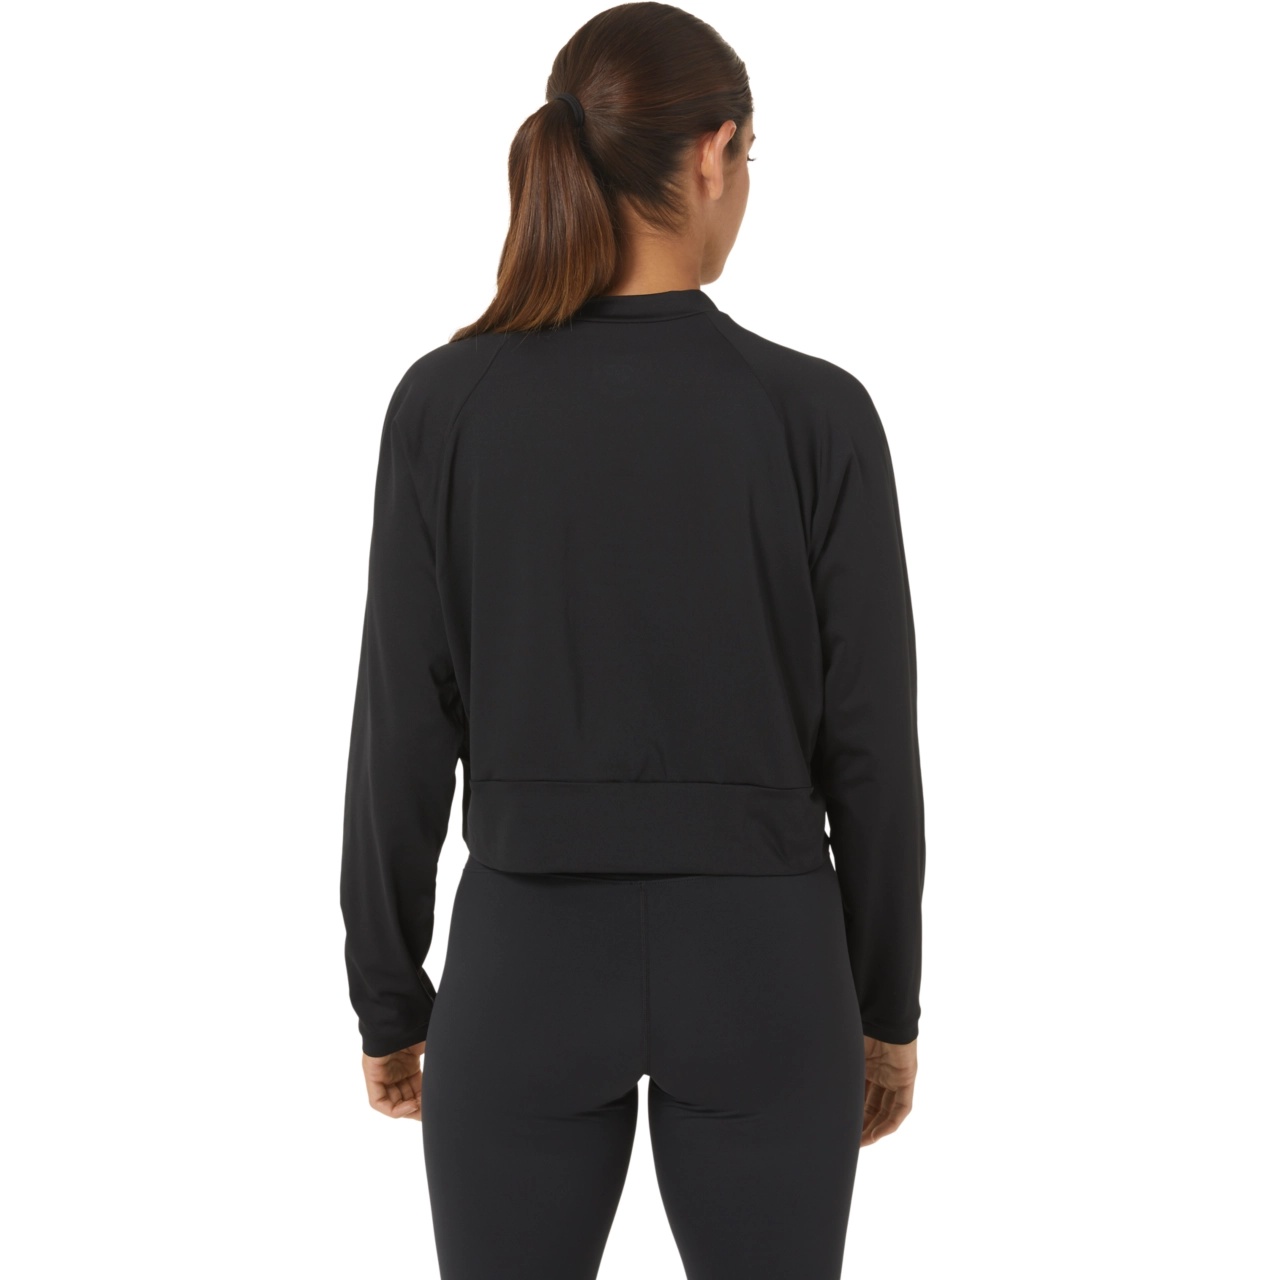 WOMEN'S THE NEW STRONG rePURPOSED PULLOVER - 2